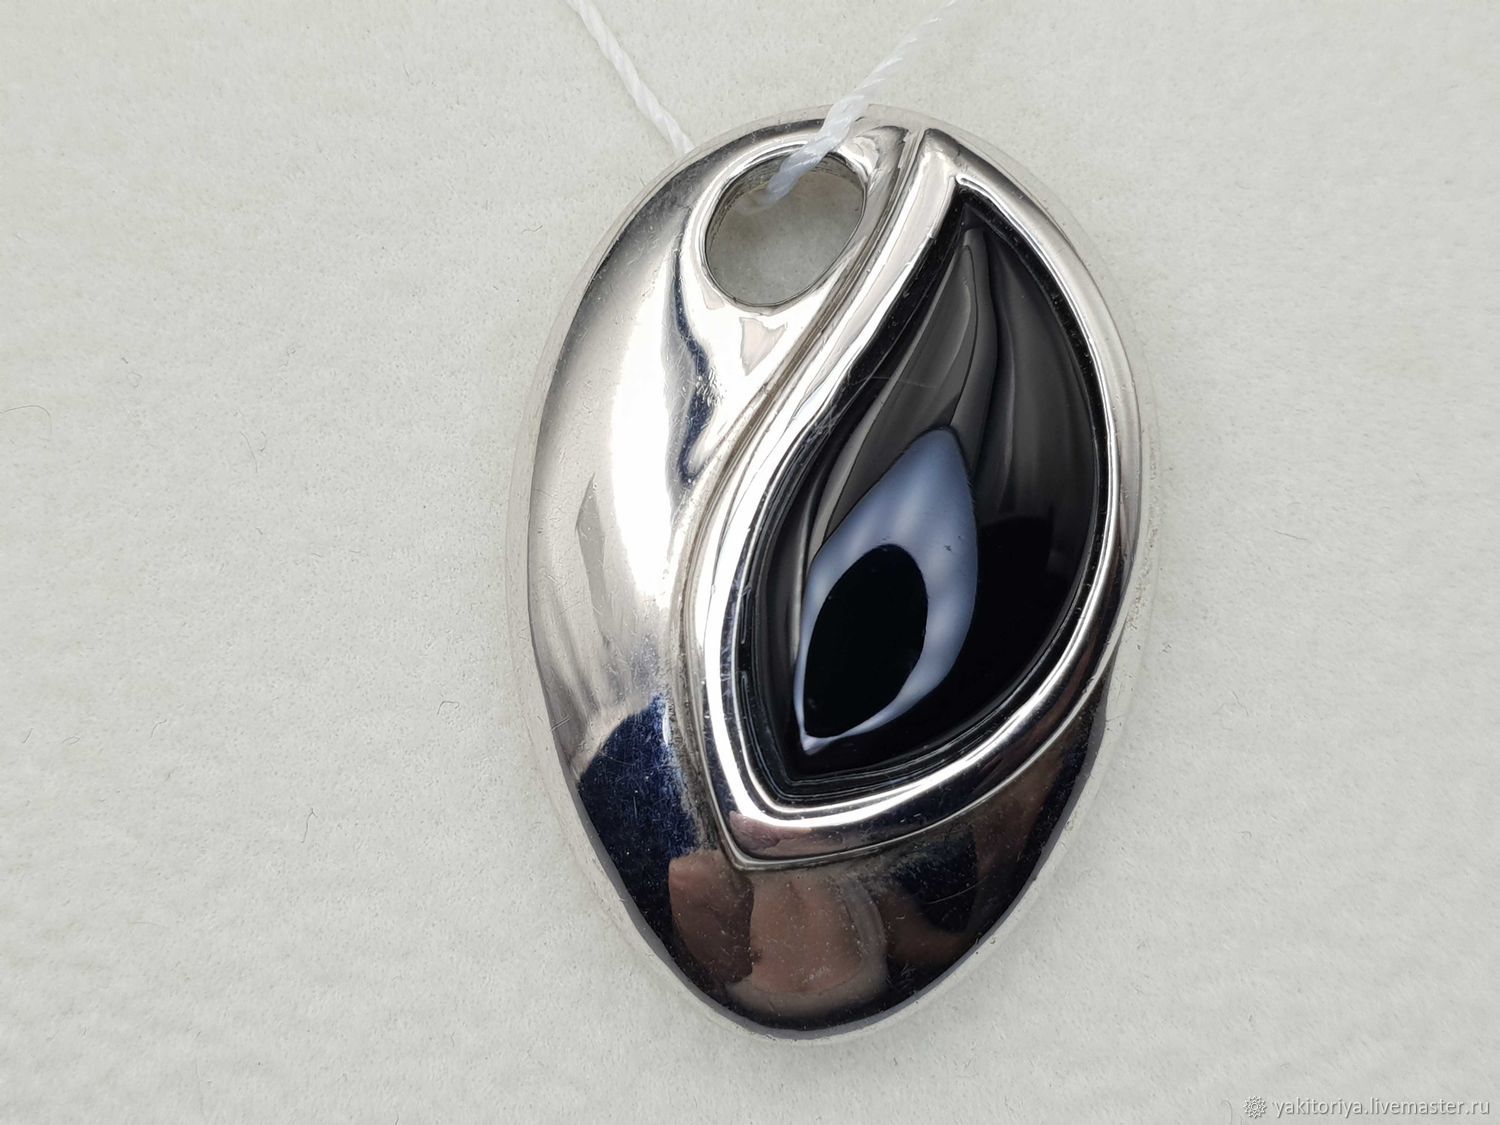 Silver pendant with black onyx 19h9 mm, Pendants, Moscow,  Фото №1